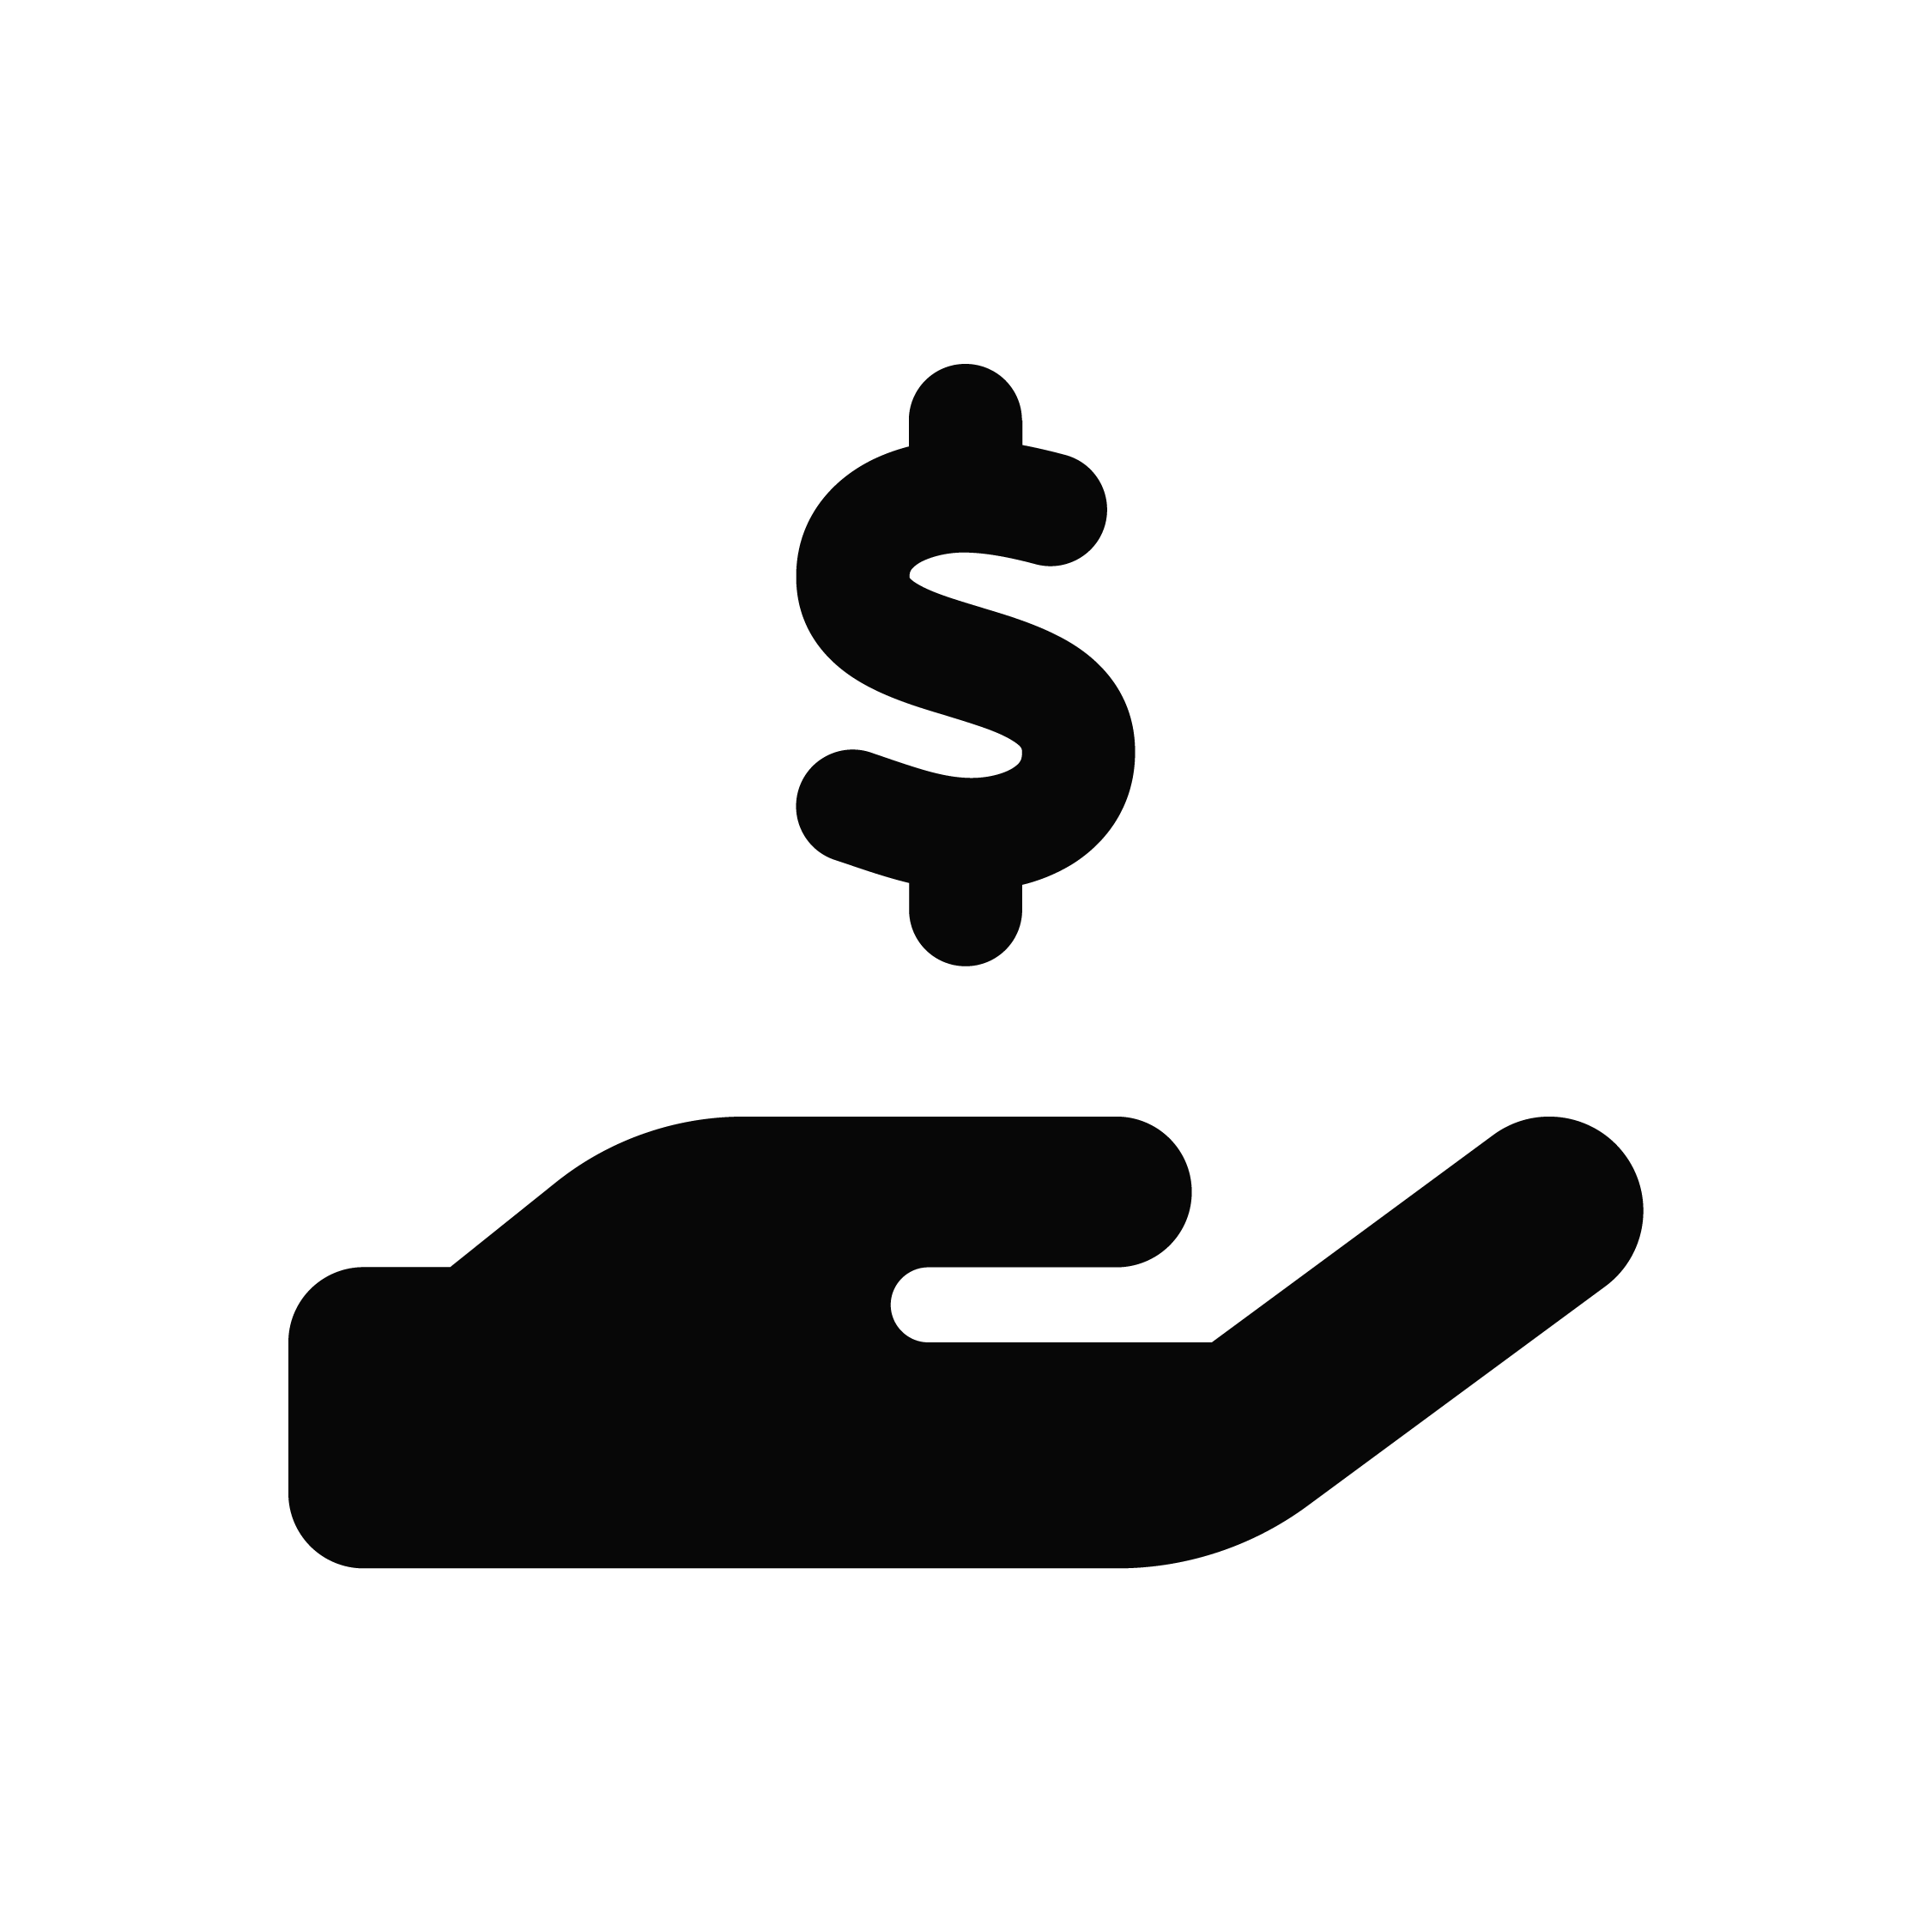 Hand holding a dollar sign